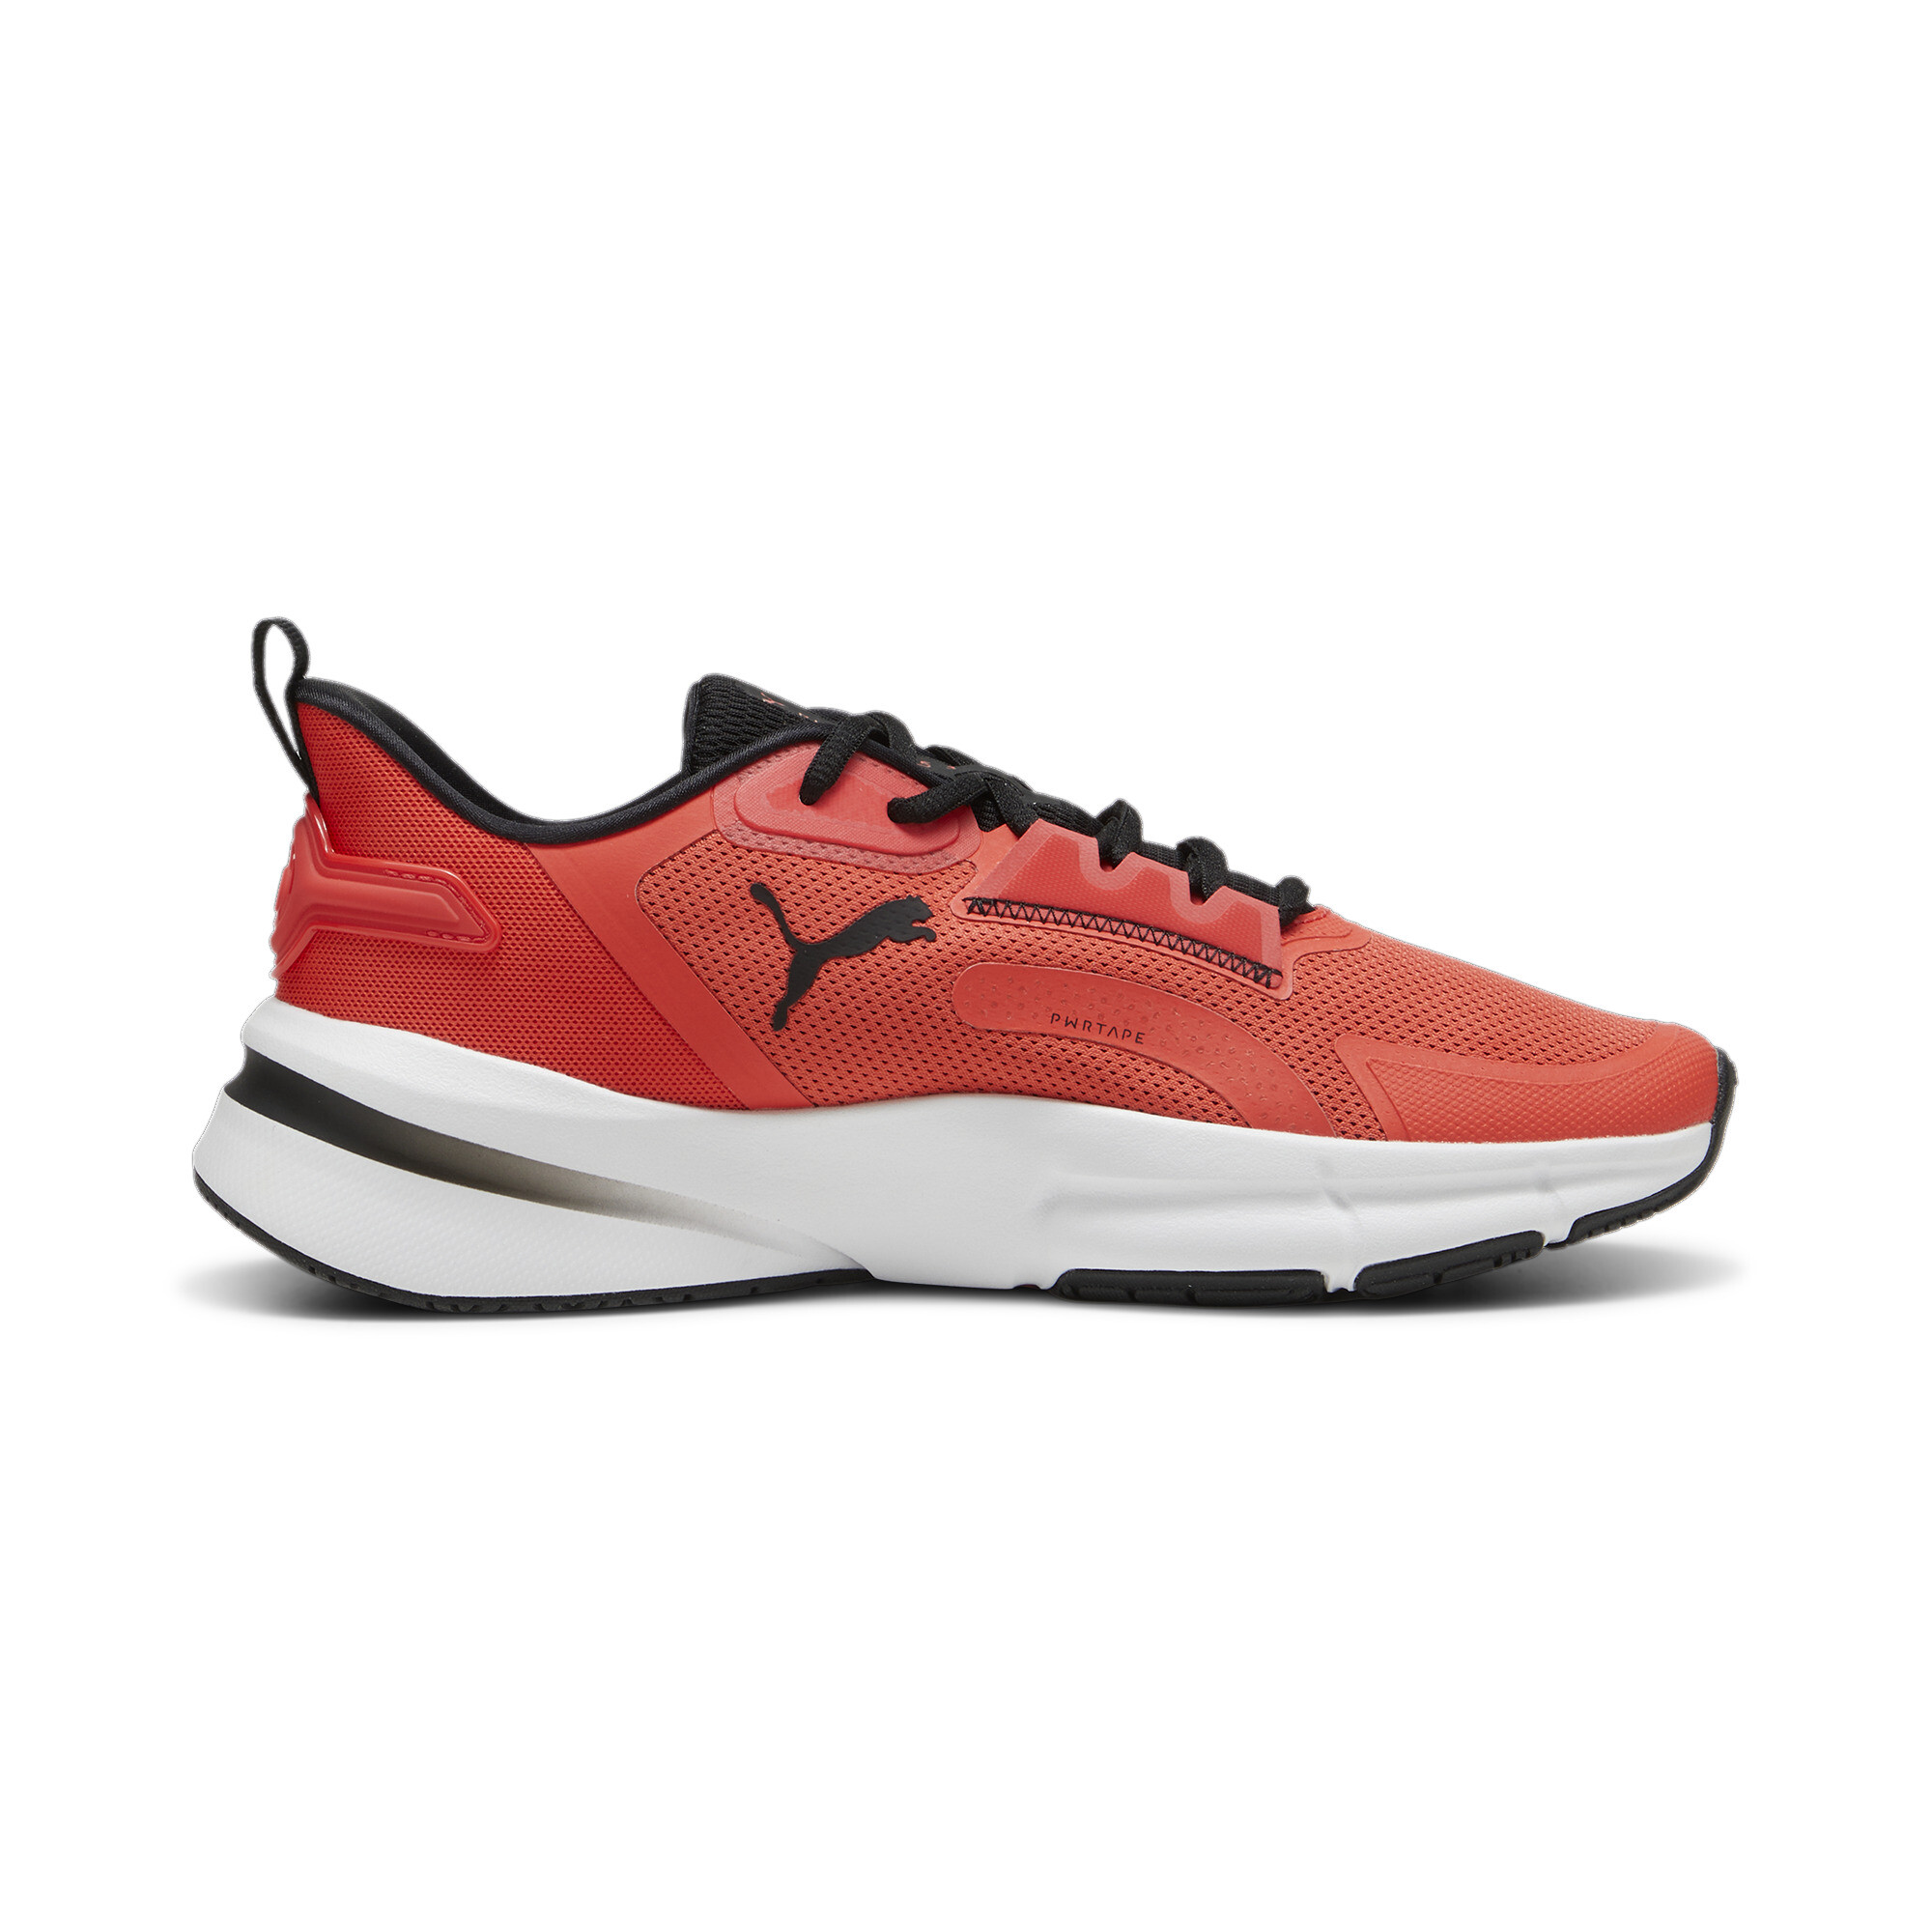 Men's PUMA PWRFrame TR 3 Training Shoes In Red, Size EU 39